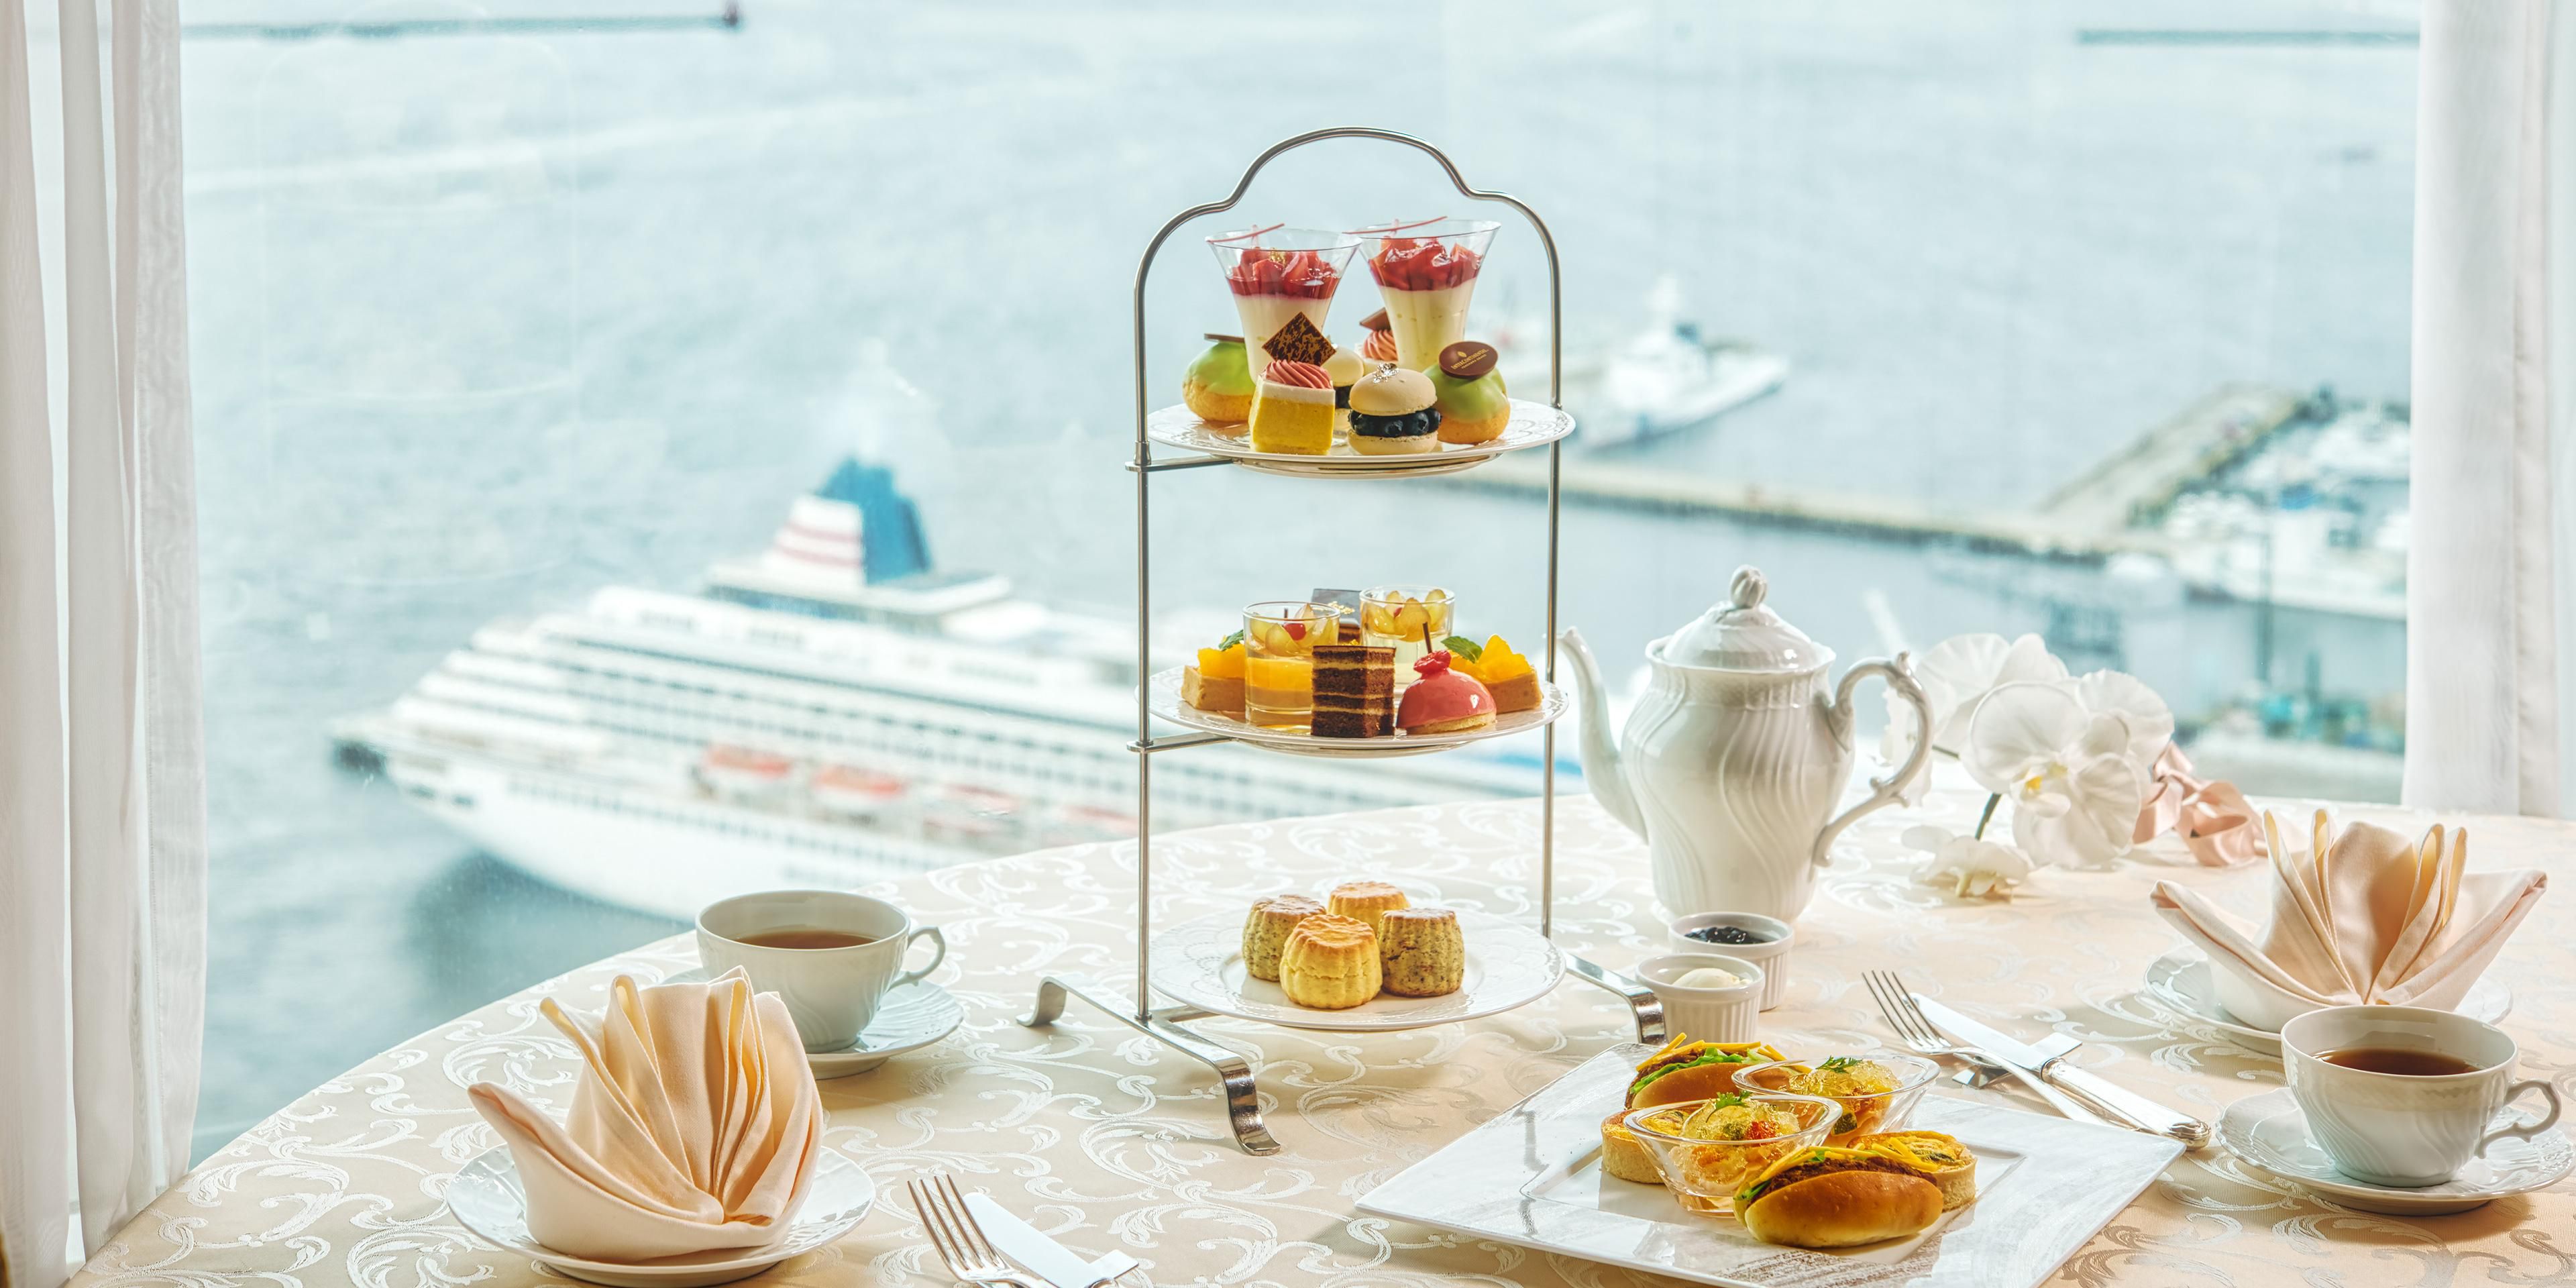 Relax with fine tea, hotel-made sweets and savouries with the magnificent portside view. There is also the yum cha afternoon tea which is included fine Chinese tea, dim sums and sweets. From restaurants and lounges to private rooms, we offer a choice of venues that can suite your get-together.